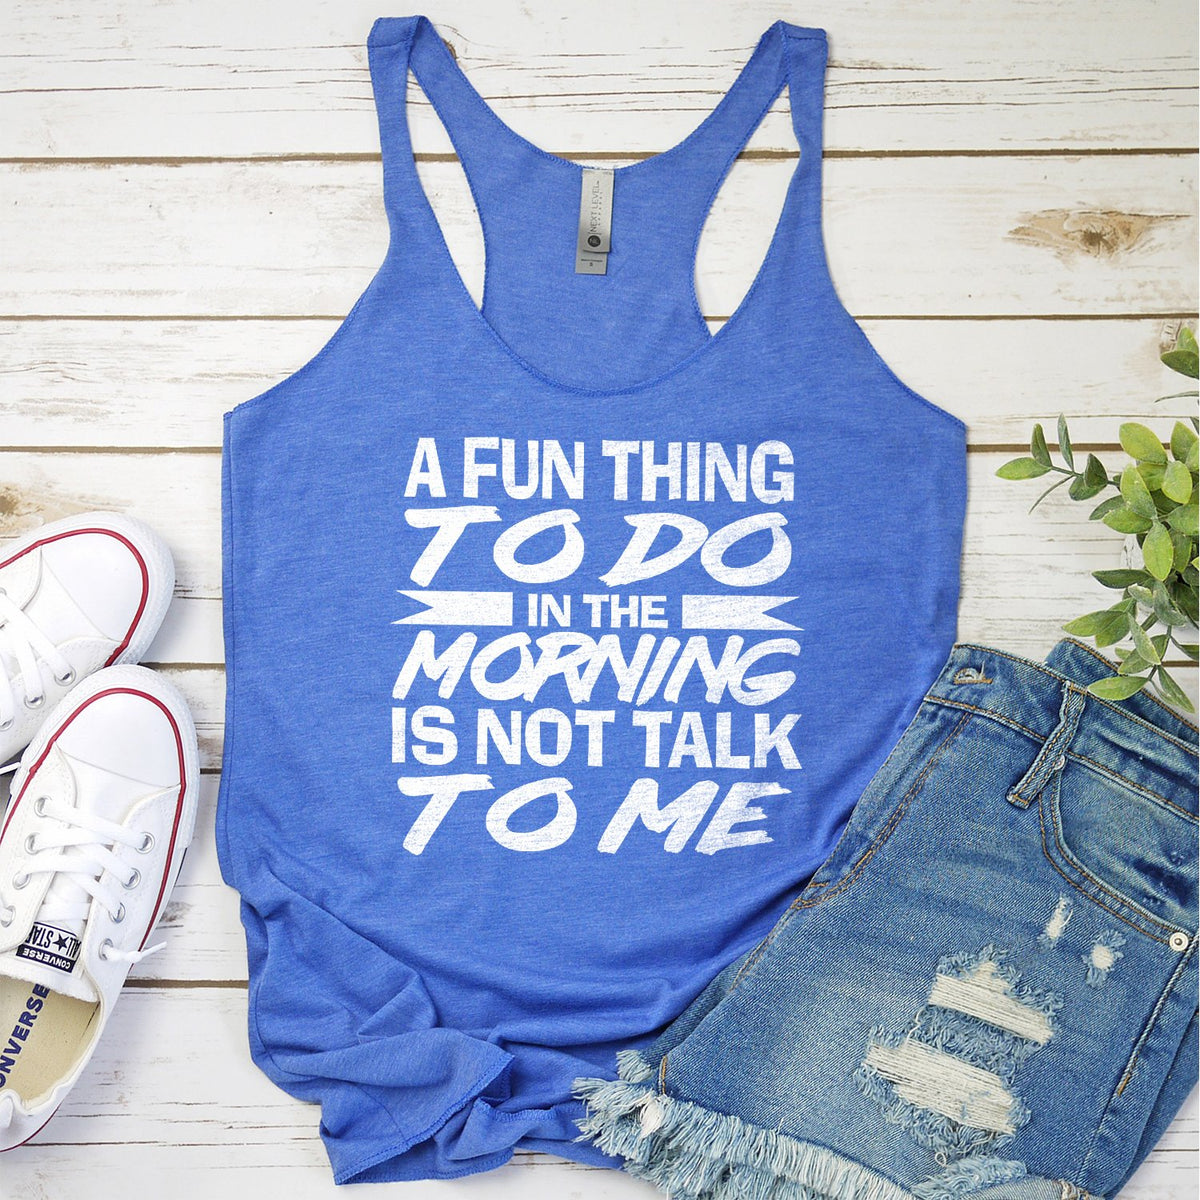 A Fun Thing To Do in The Morning is Not Talk To Me - Tank Top Racerback